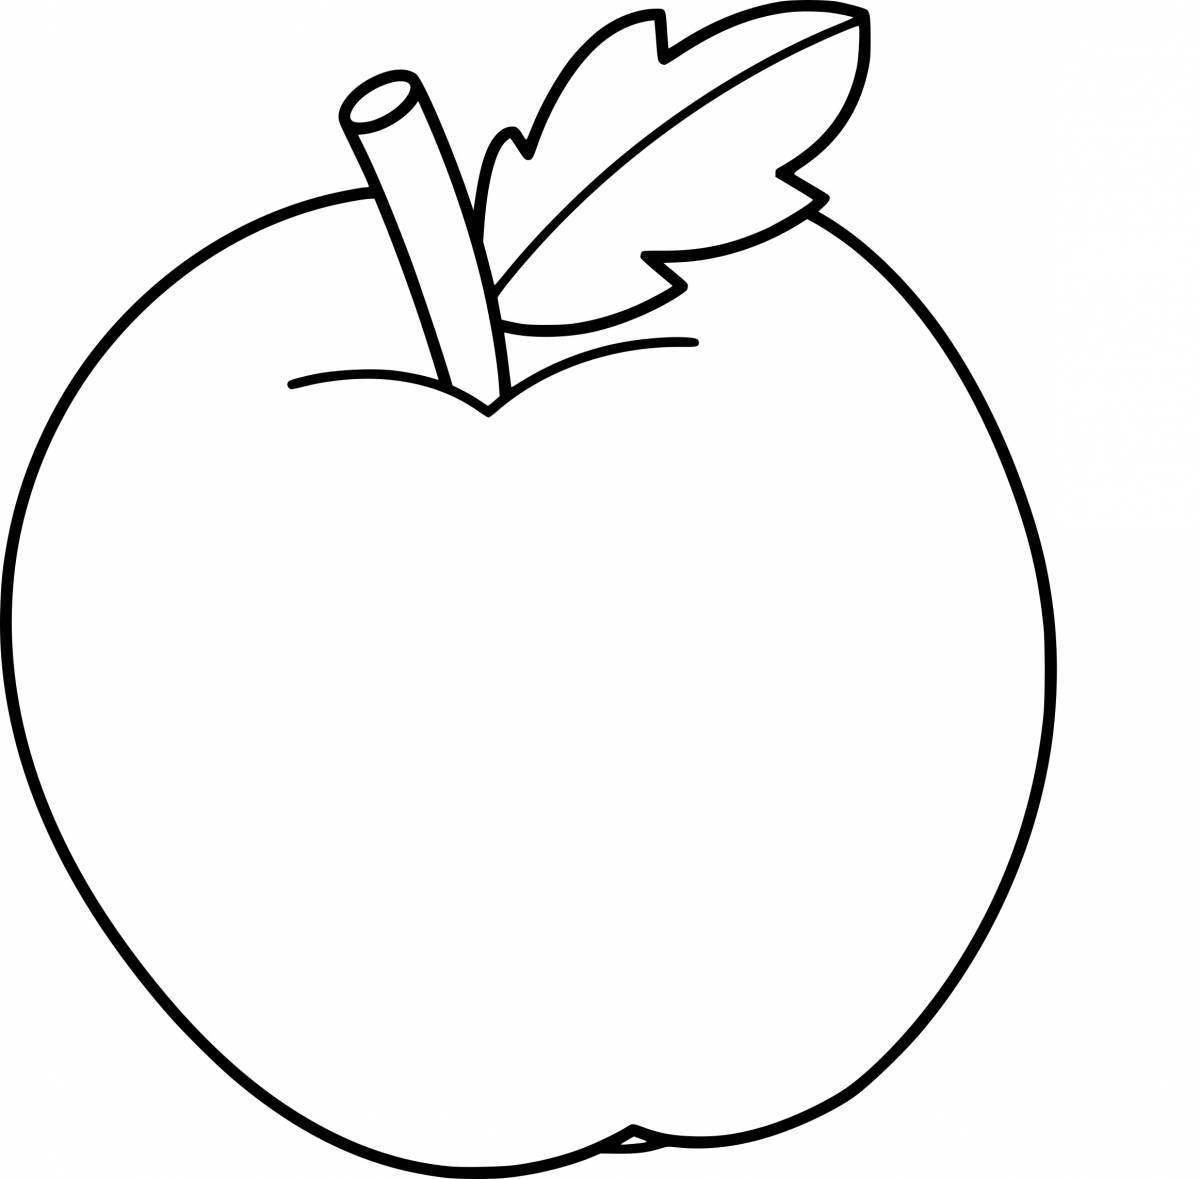 Playful apple coloring book for 3-4 year olds